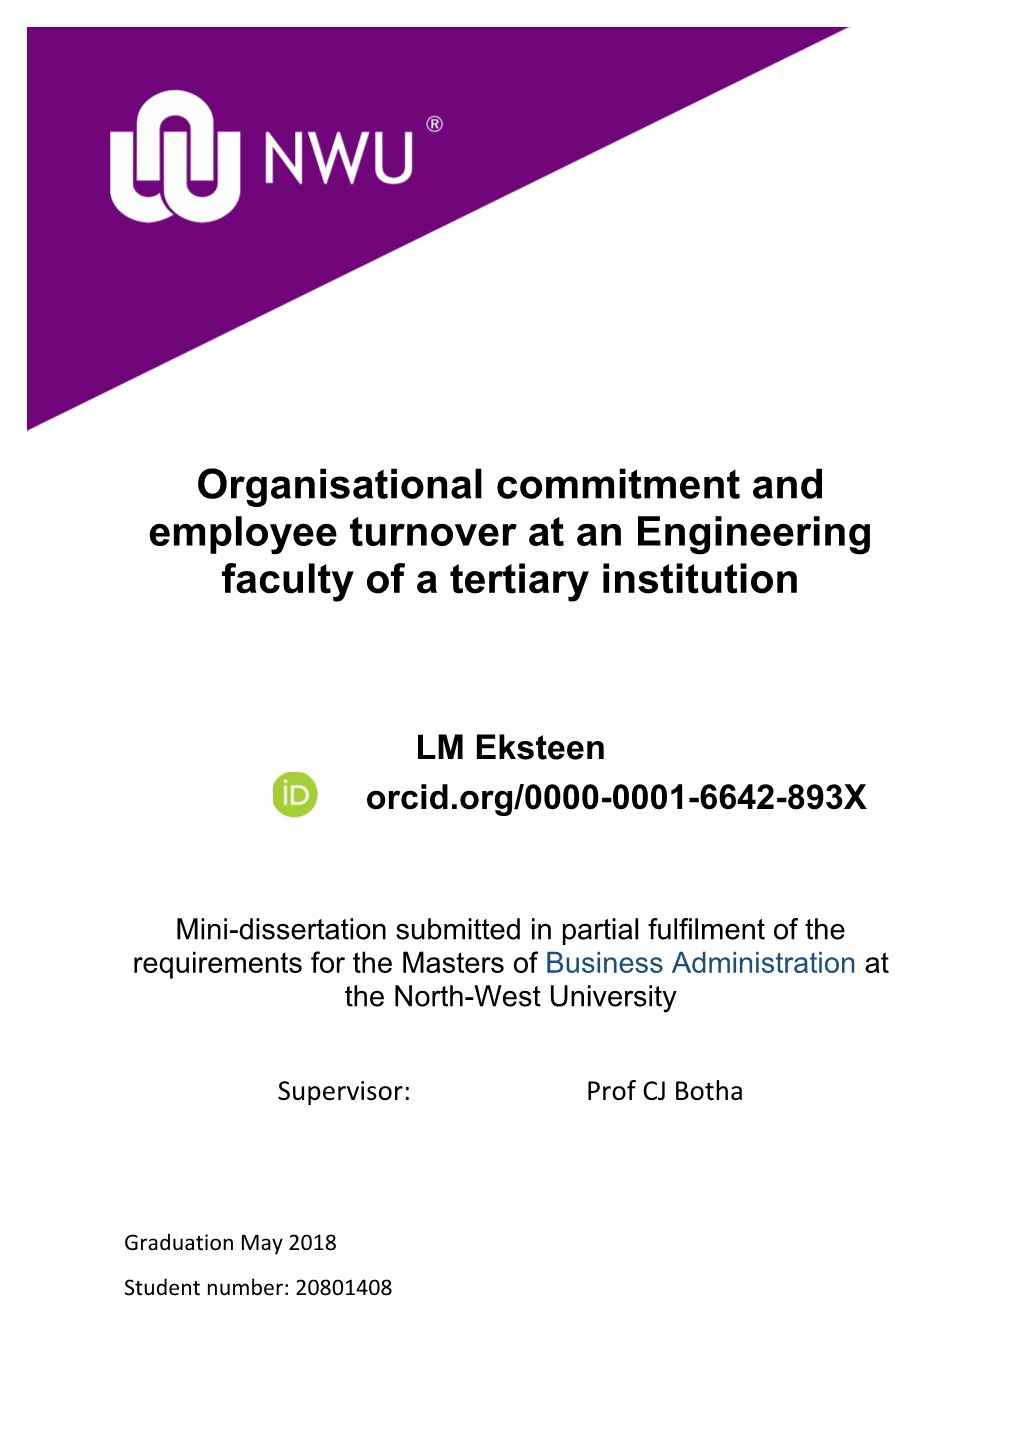 Organisational Commitment and Employee Turnover at an Engineering Faculty of a Tertiary Institution